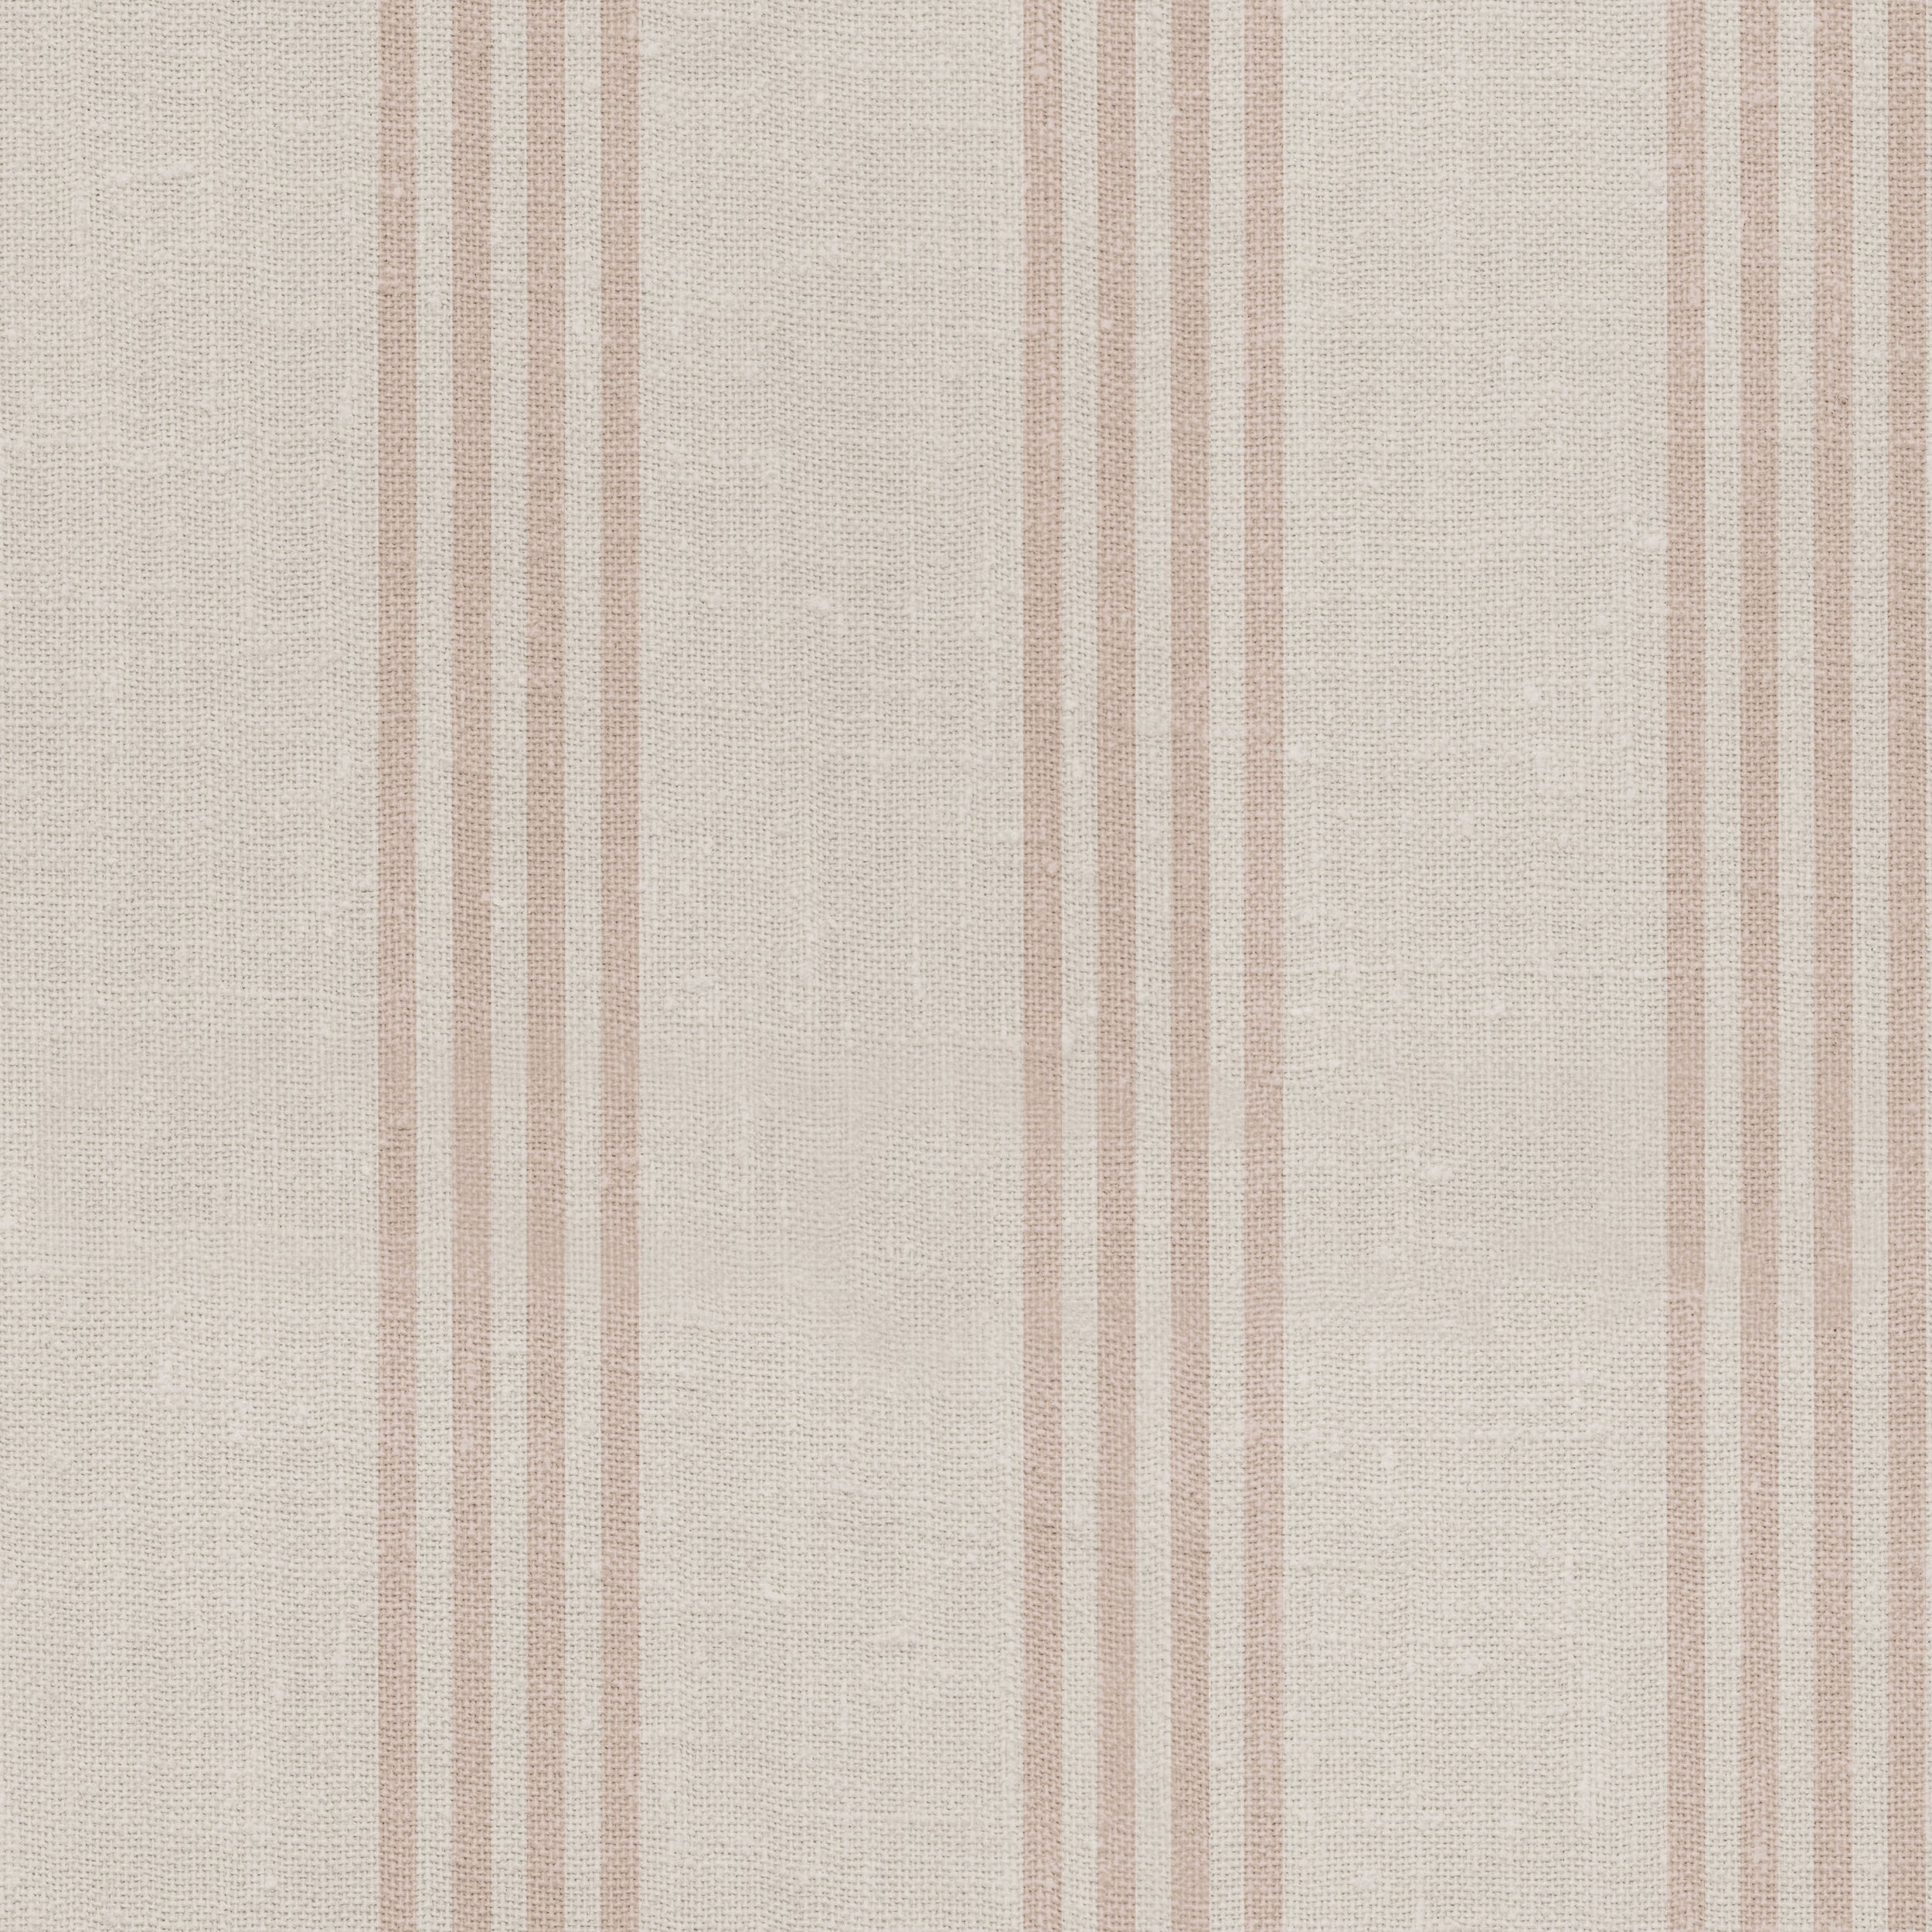 Close-up of the "Ticking Fabrics 8" wallpaper showing its beige base color with vertical, evenly spaced stripes. The subtle variations in the stripes’ thickness convey a classic and timeless textile design, suitable for various interior styles.